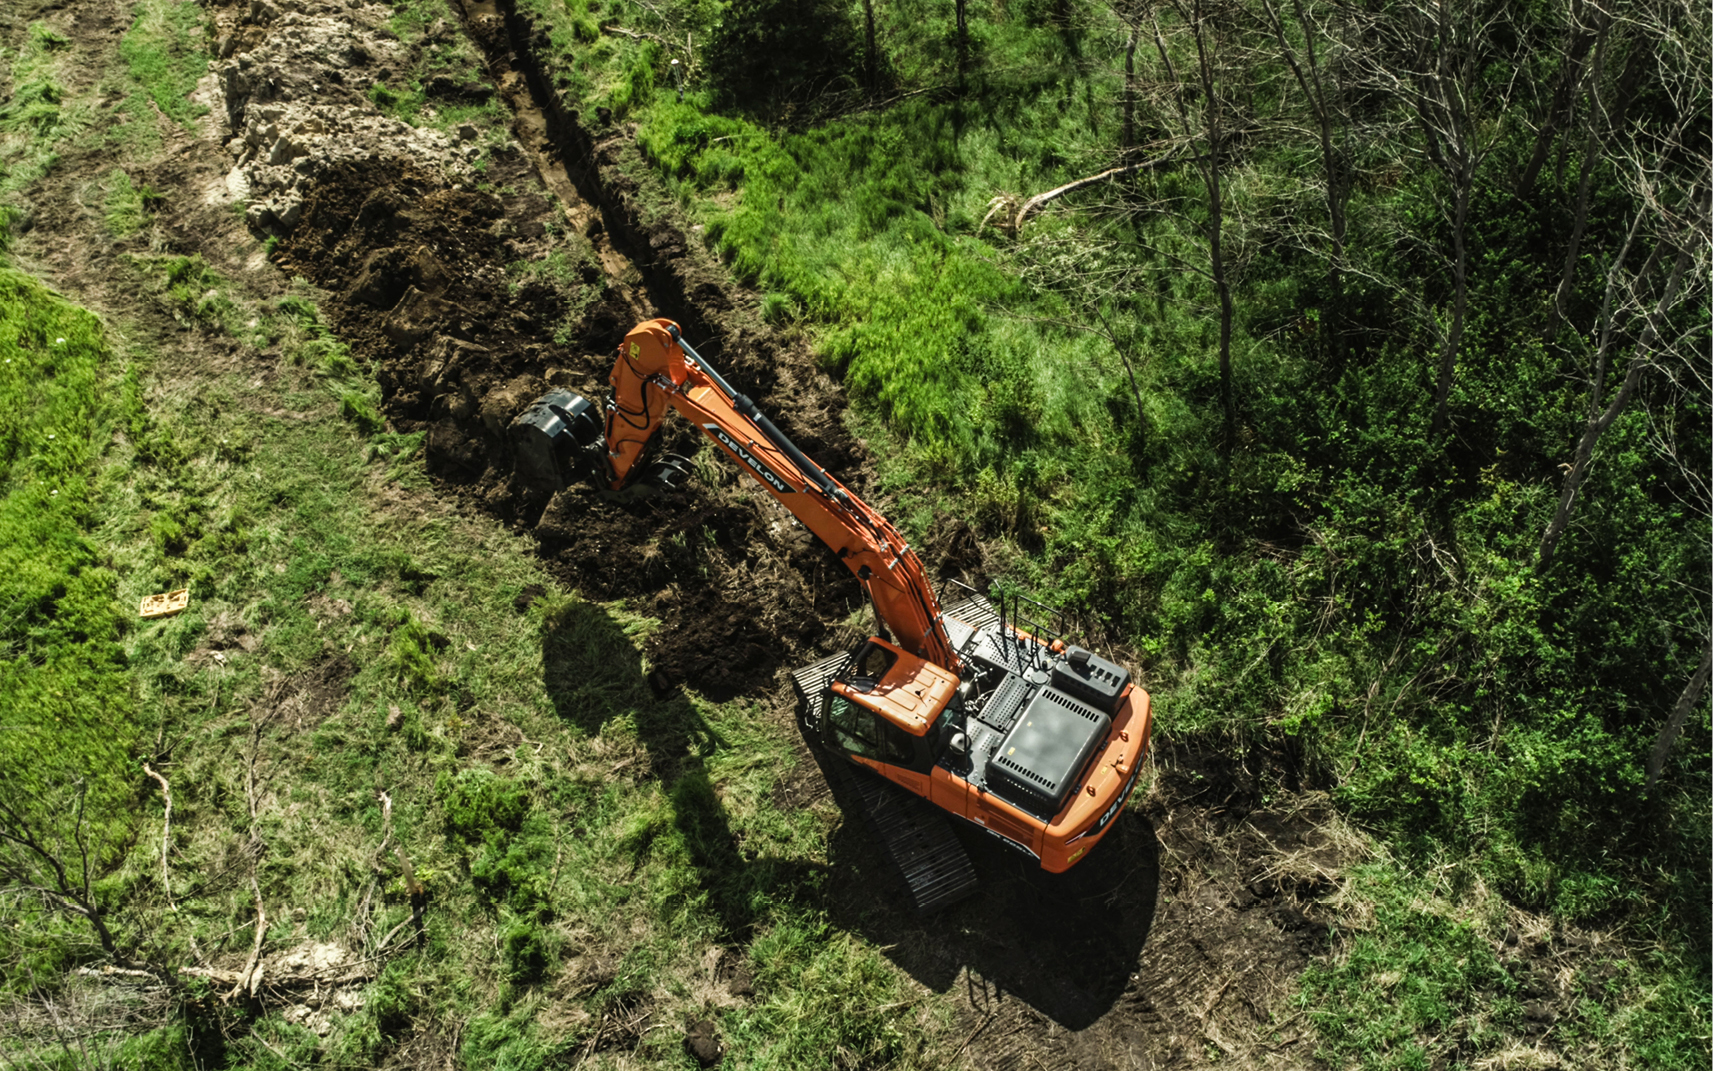 An aerial view, taken by a drone, of a DEVELON excavator working at a job site.